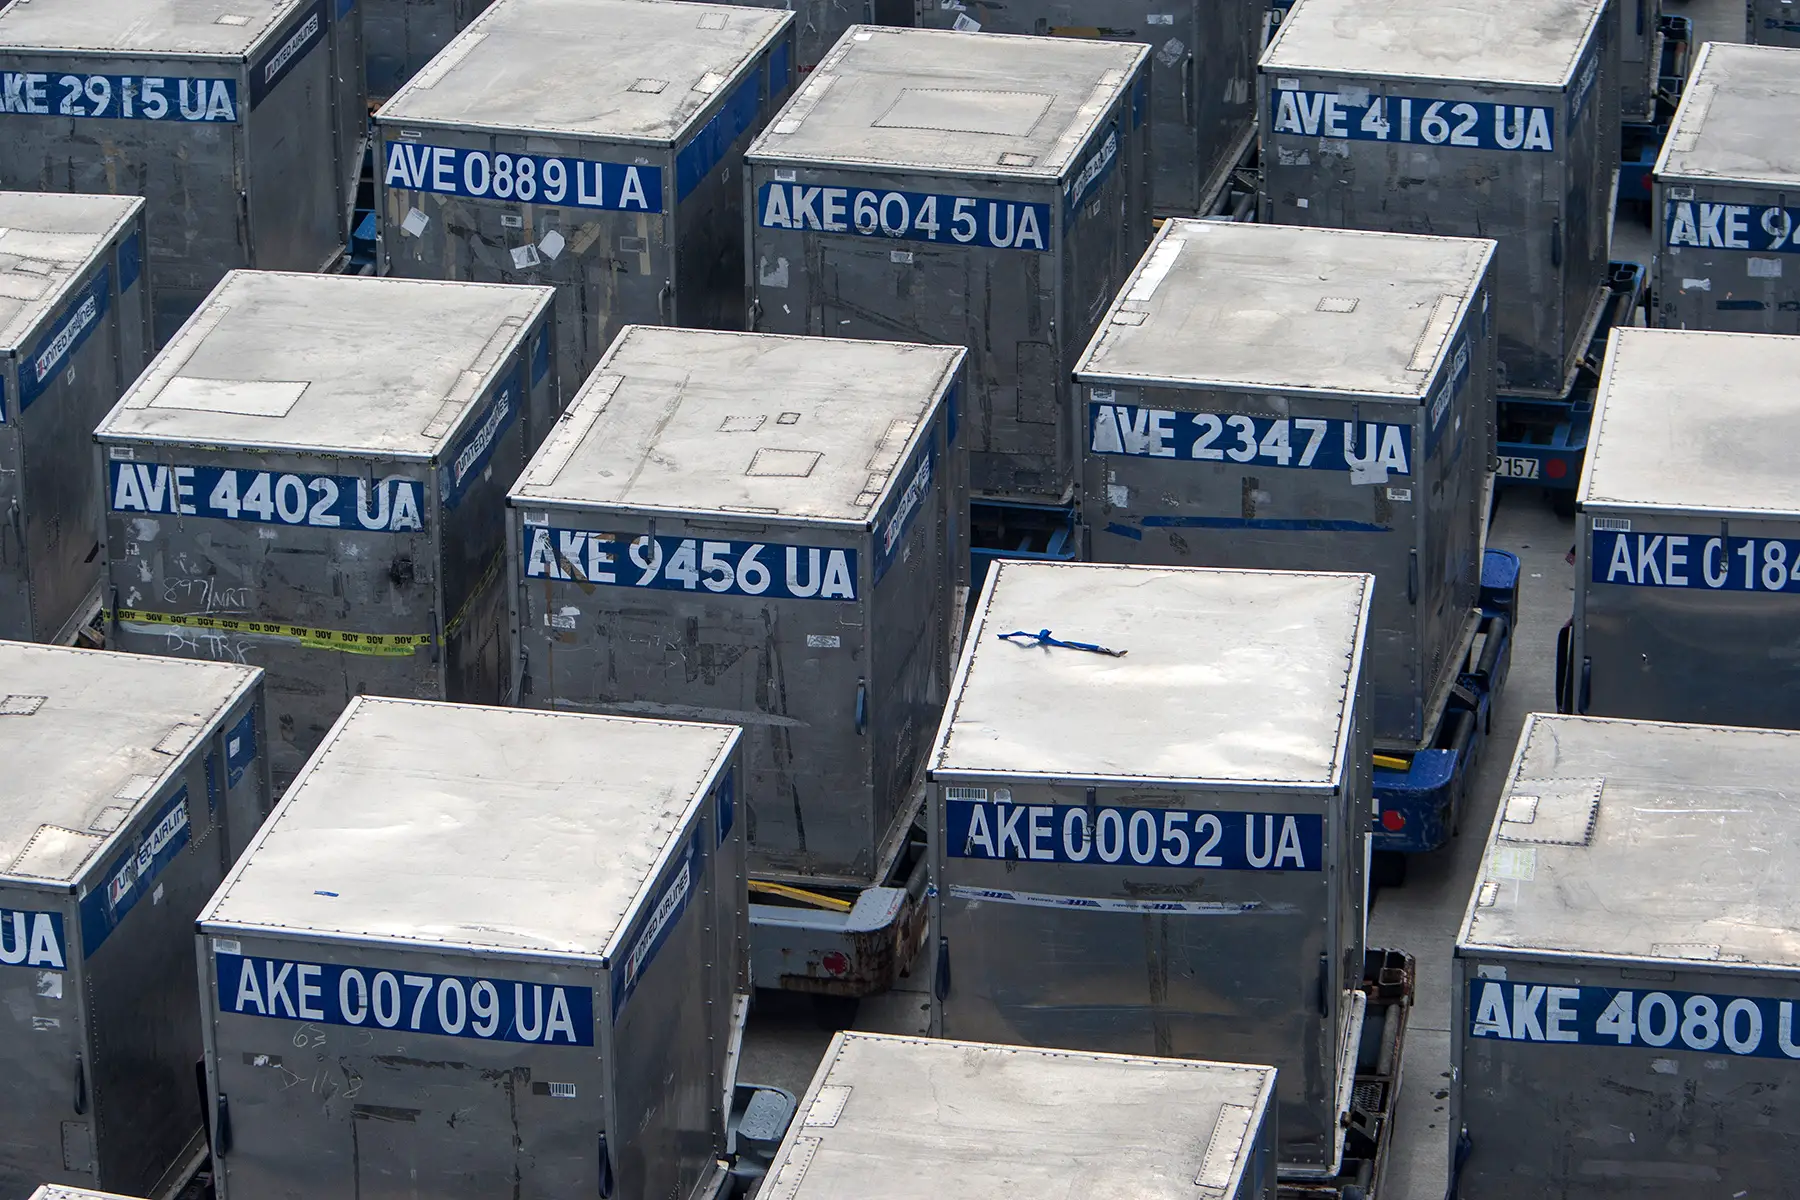 Air freight containers